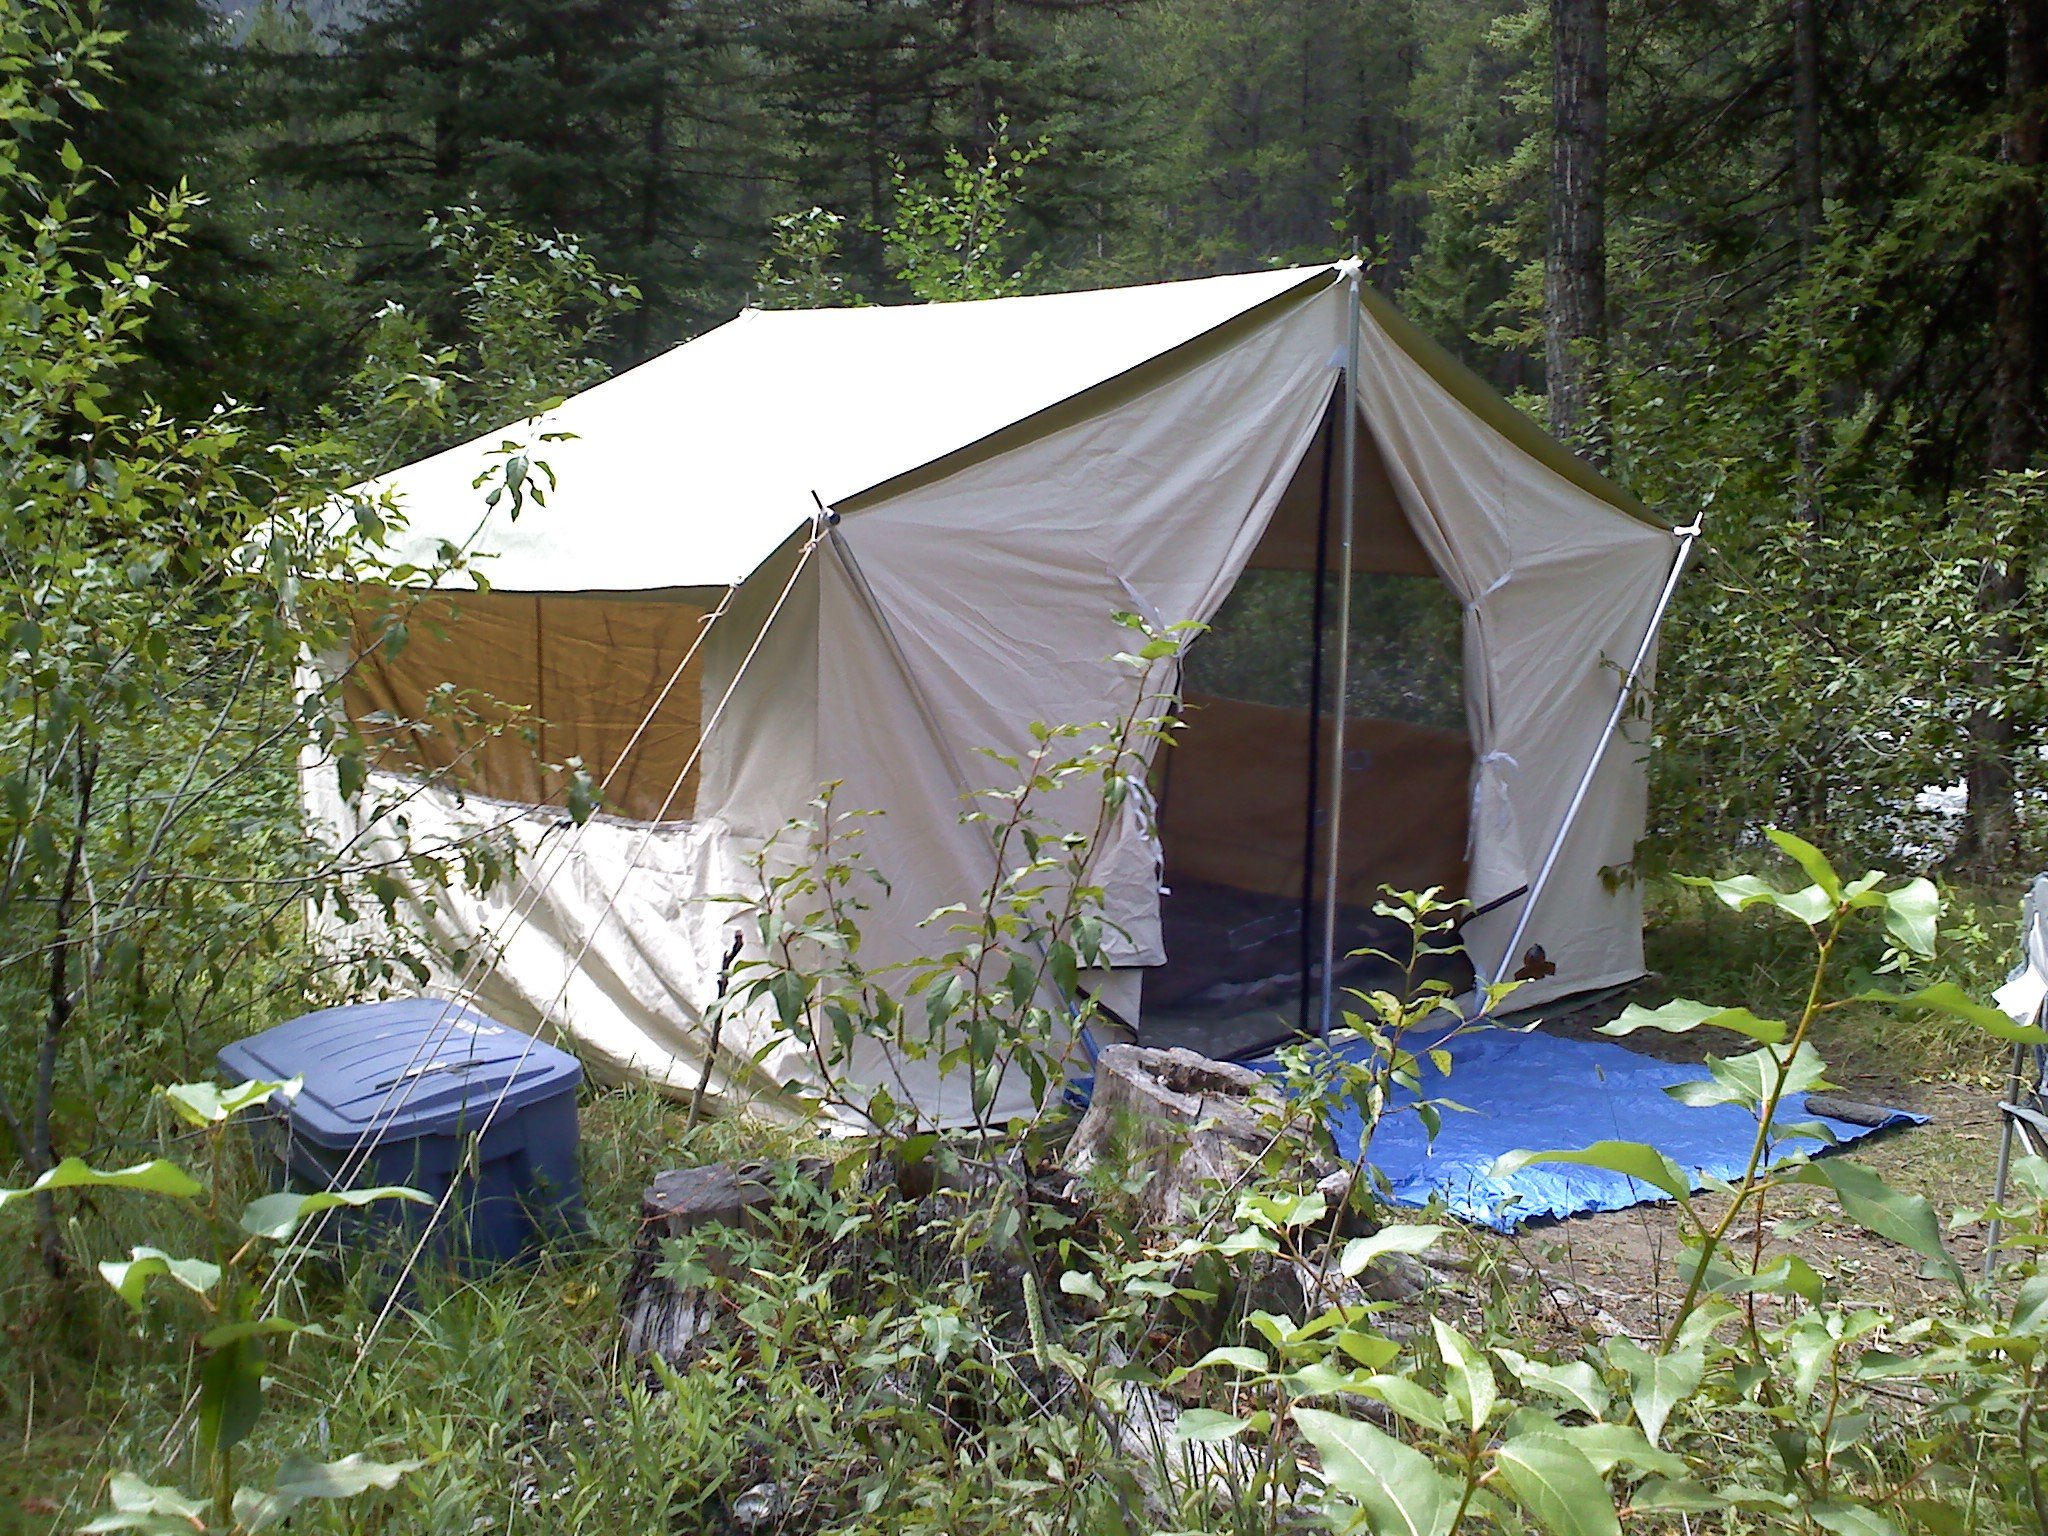 TEAR MENDER — Reliable Tent and Tipi